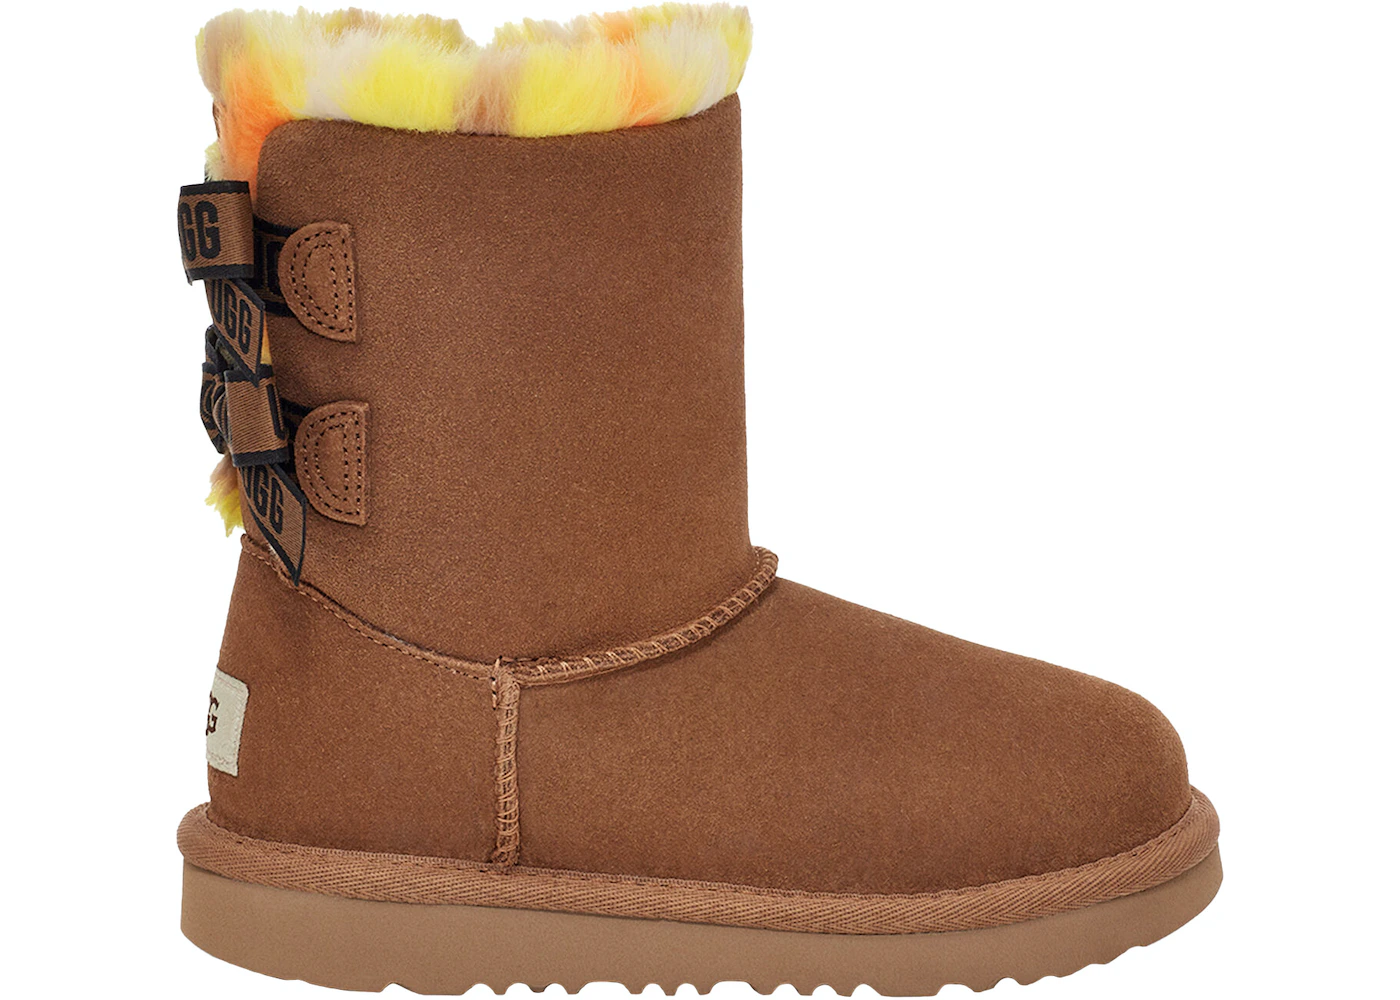 UGG Bailey Bow Plaid Punk Boot Chesnut (Toddler) Toddler - 1134930T-CHE ...